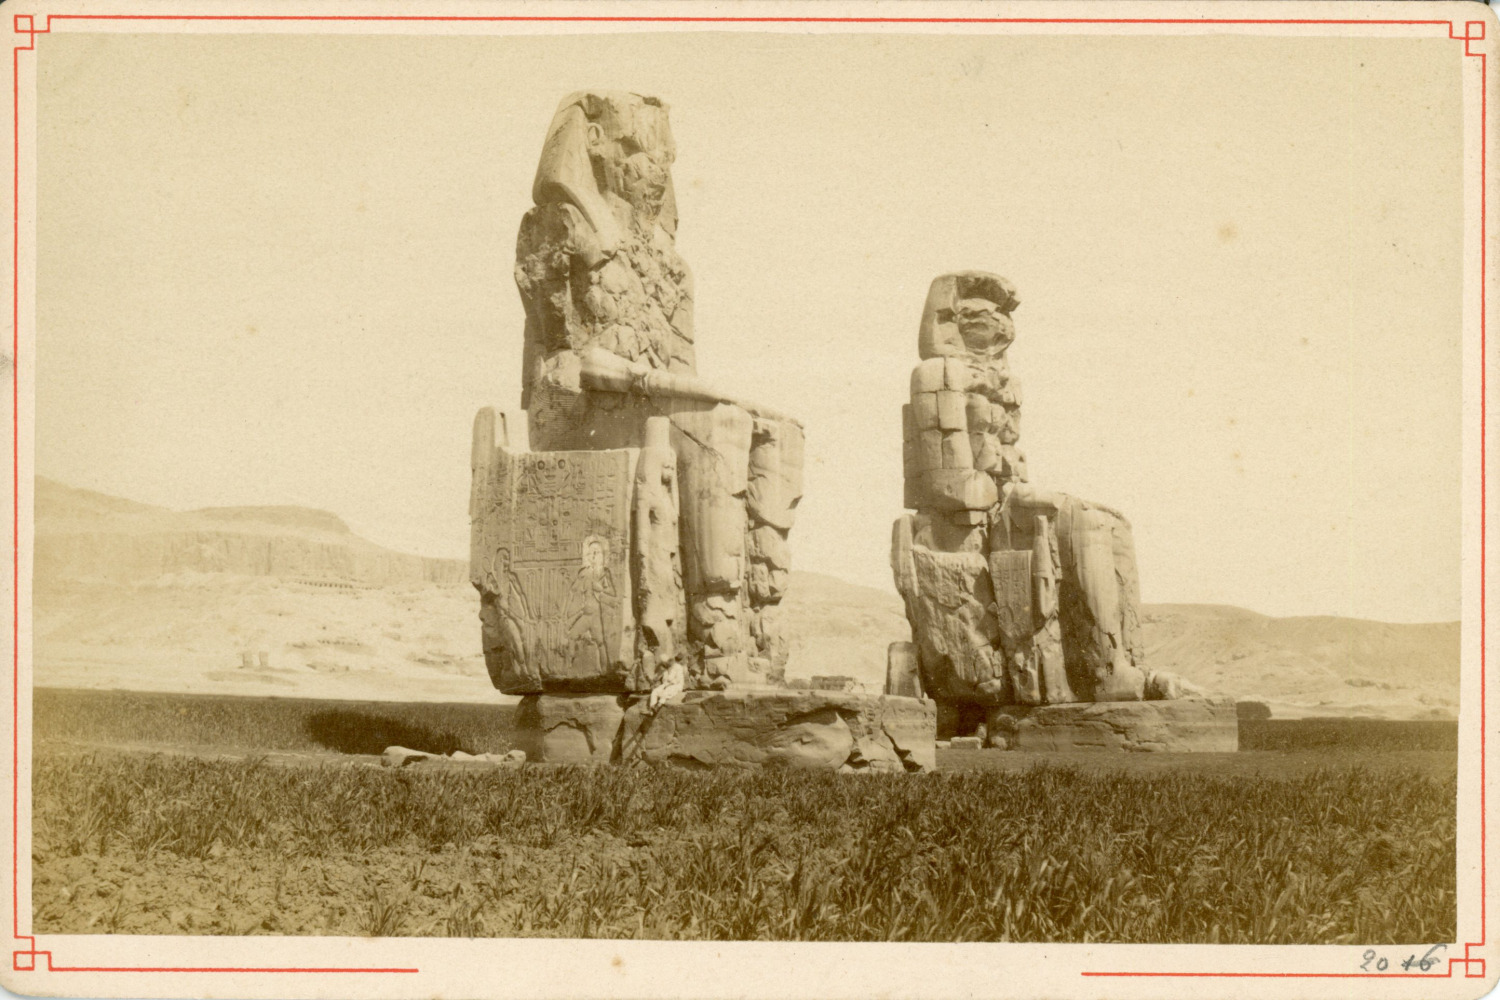 Egypt, Thebes, Colossi of Memnon, Amenhotep III Vintage Albumen Print  